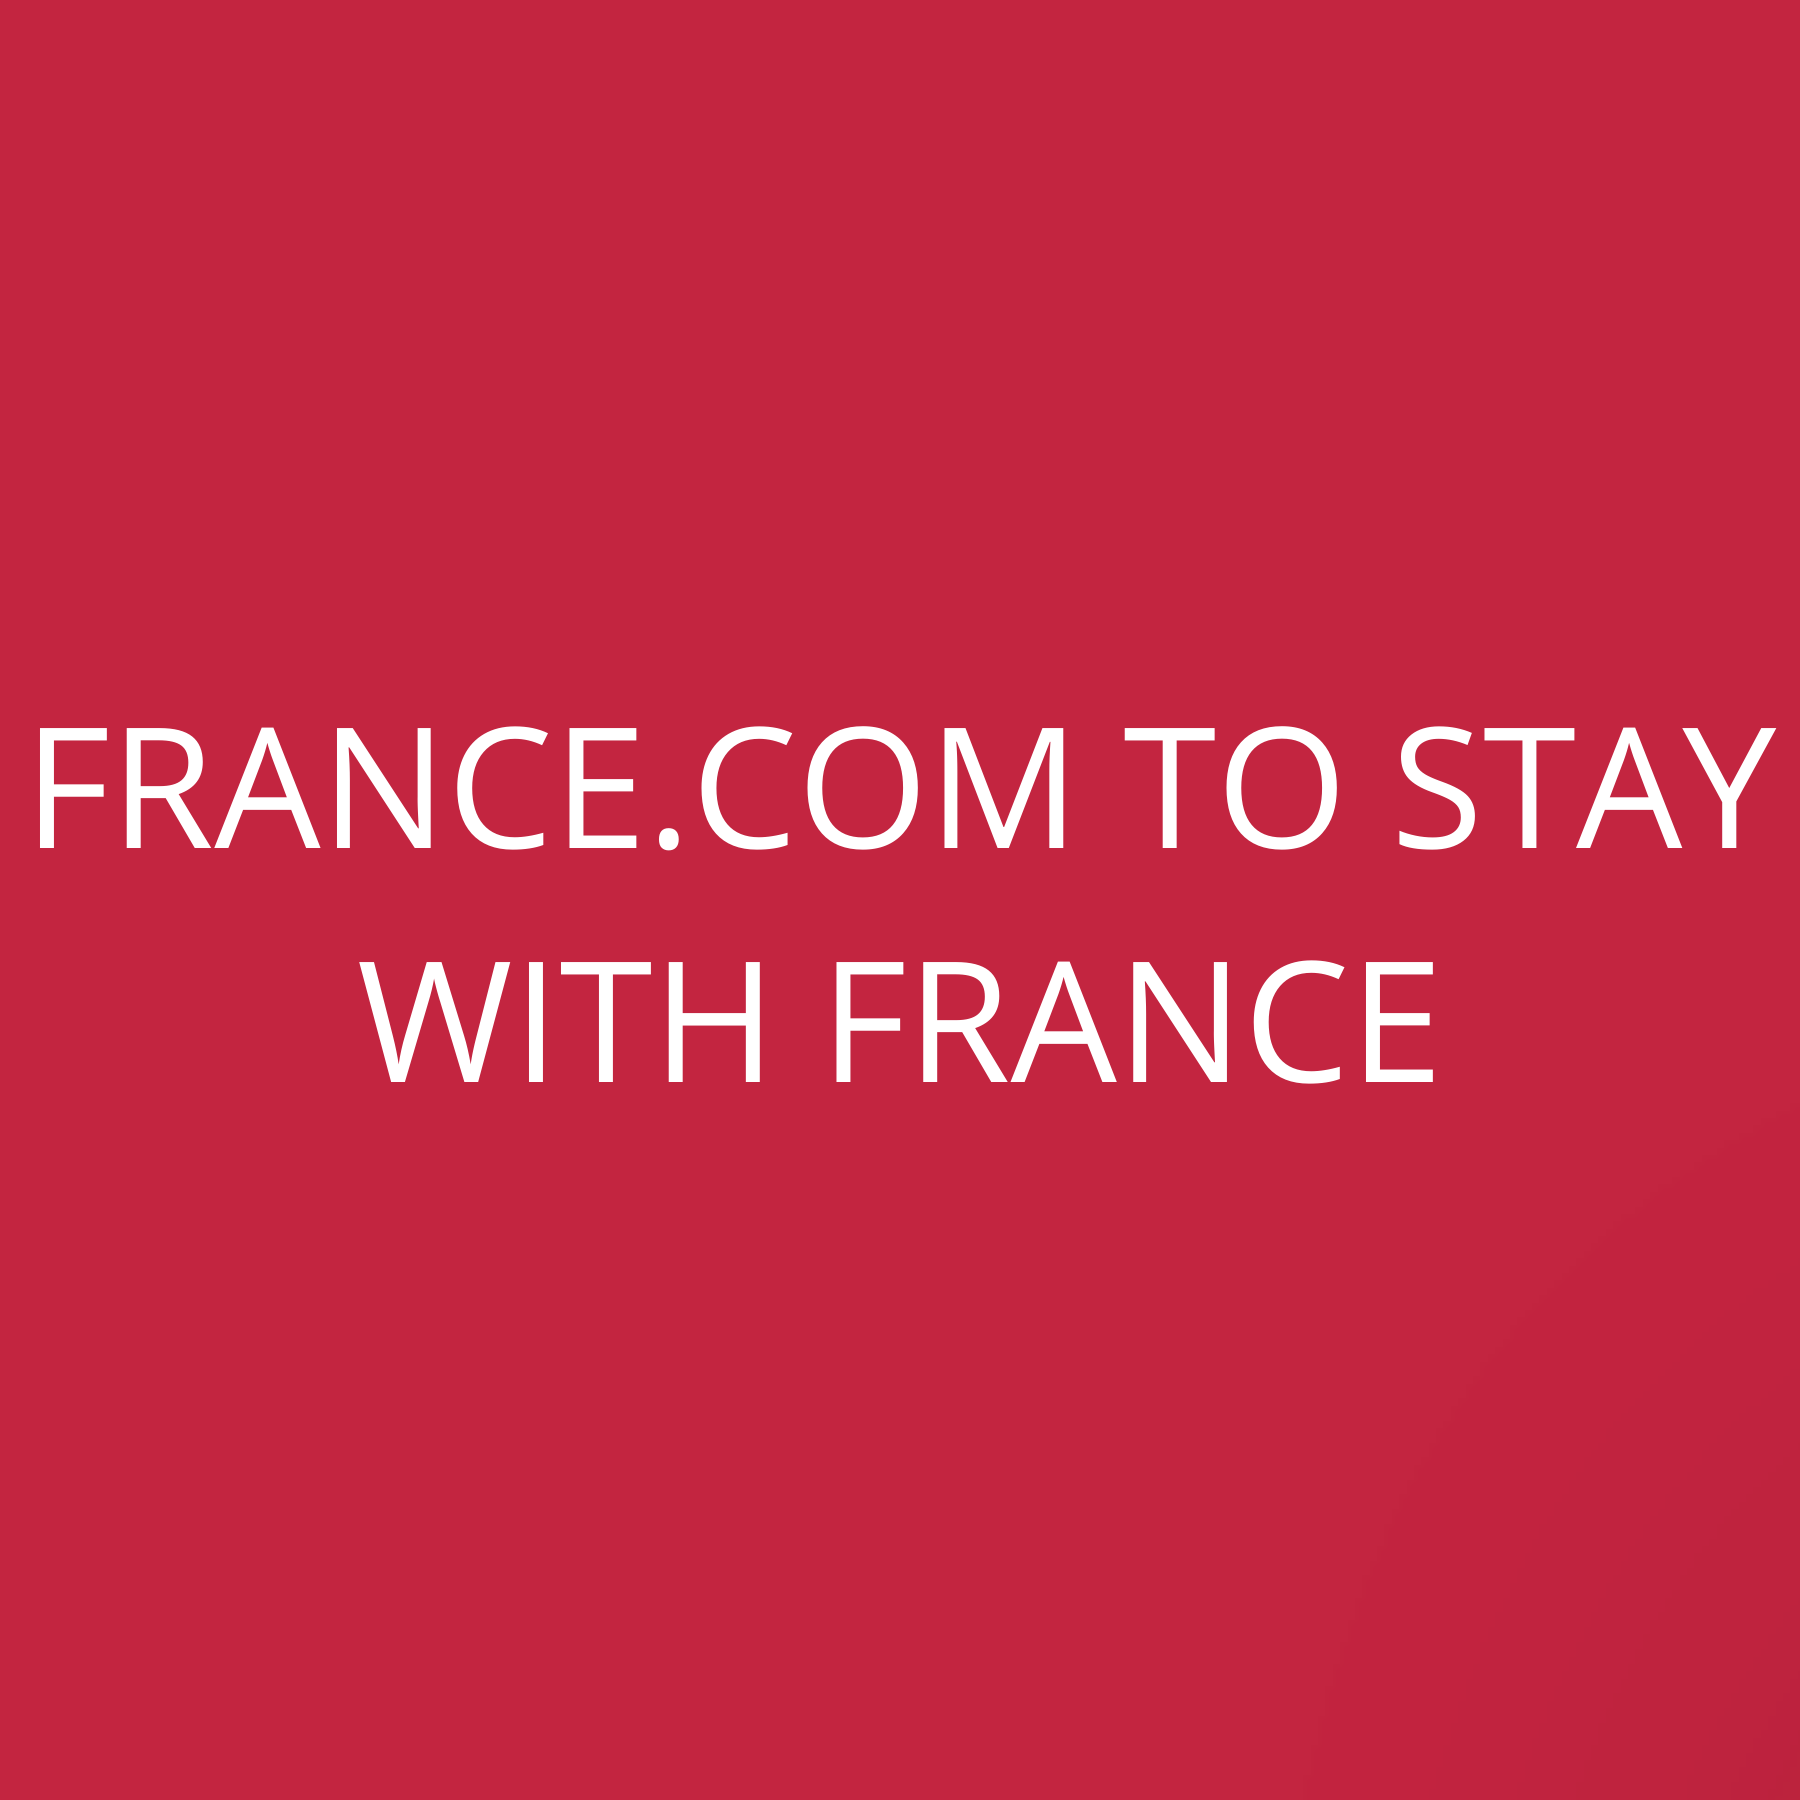 France.com to stay with France